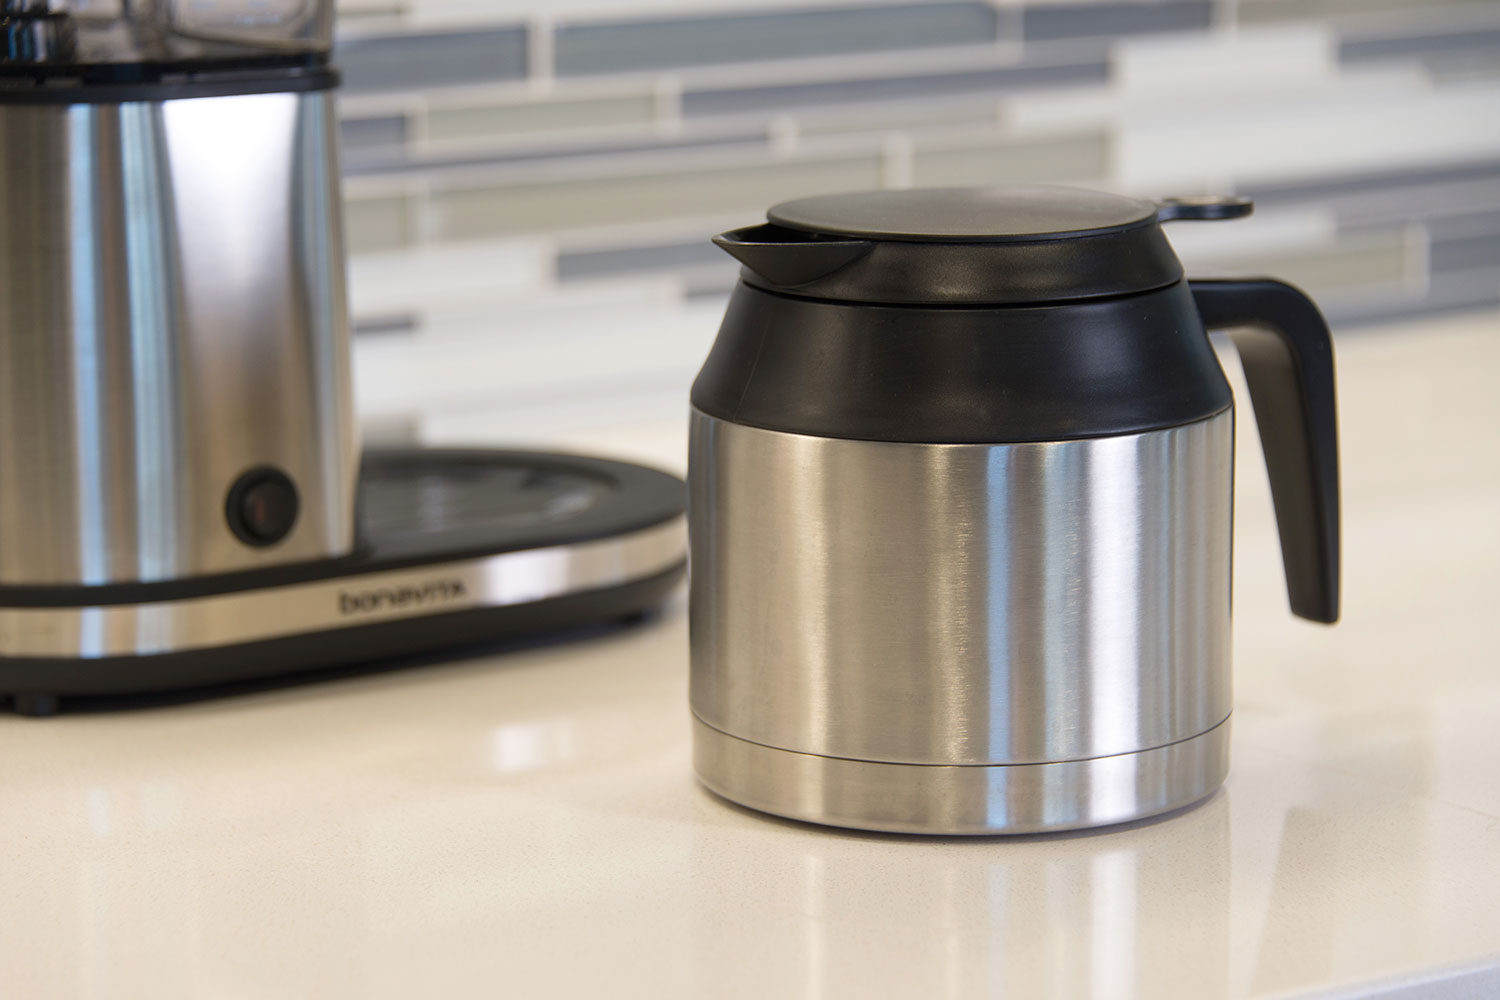 Bonavita 5-Cup One-Touch Thermal Carafe Review: Simple and Excellent